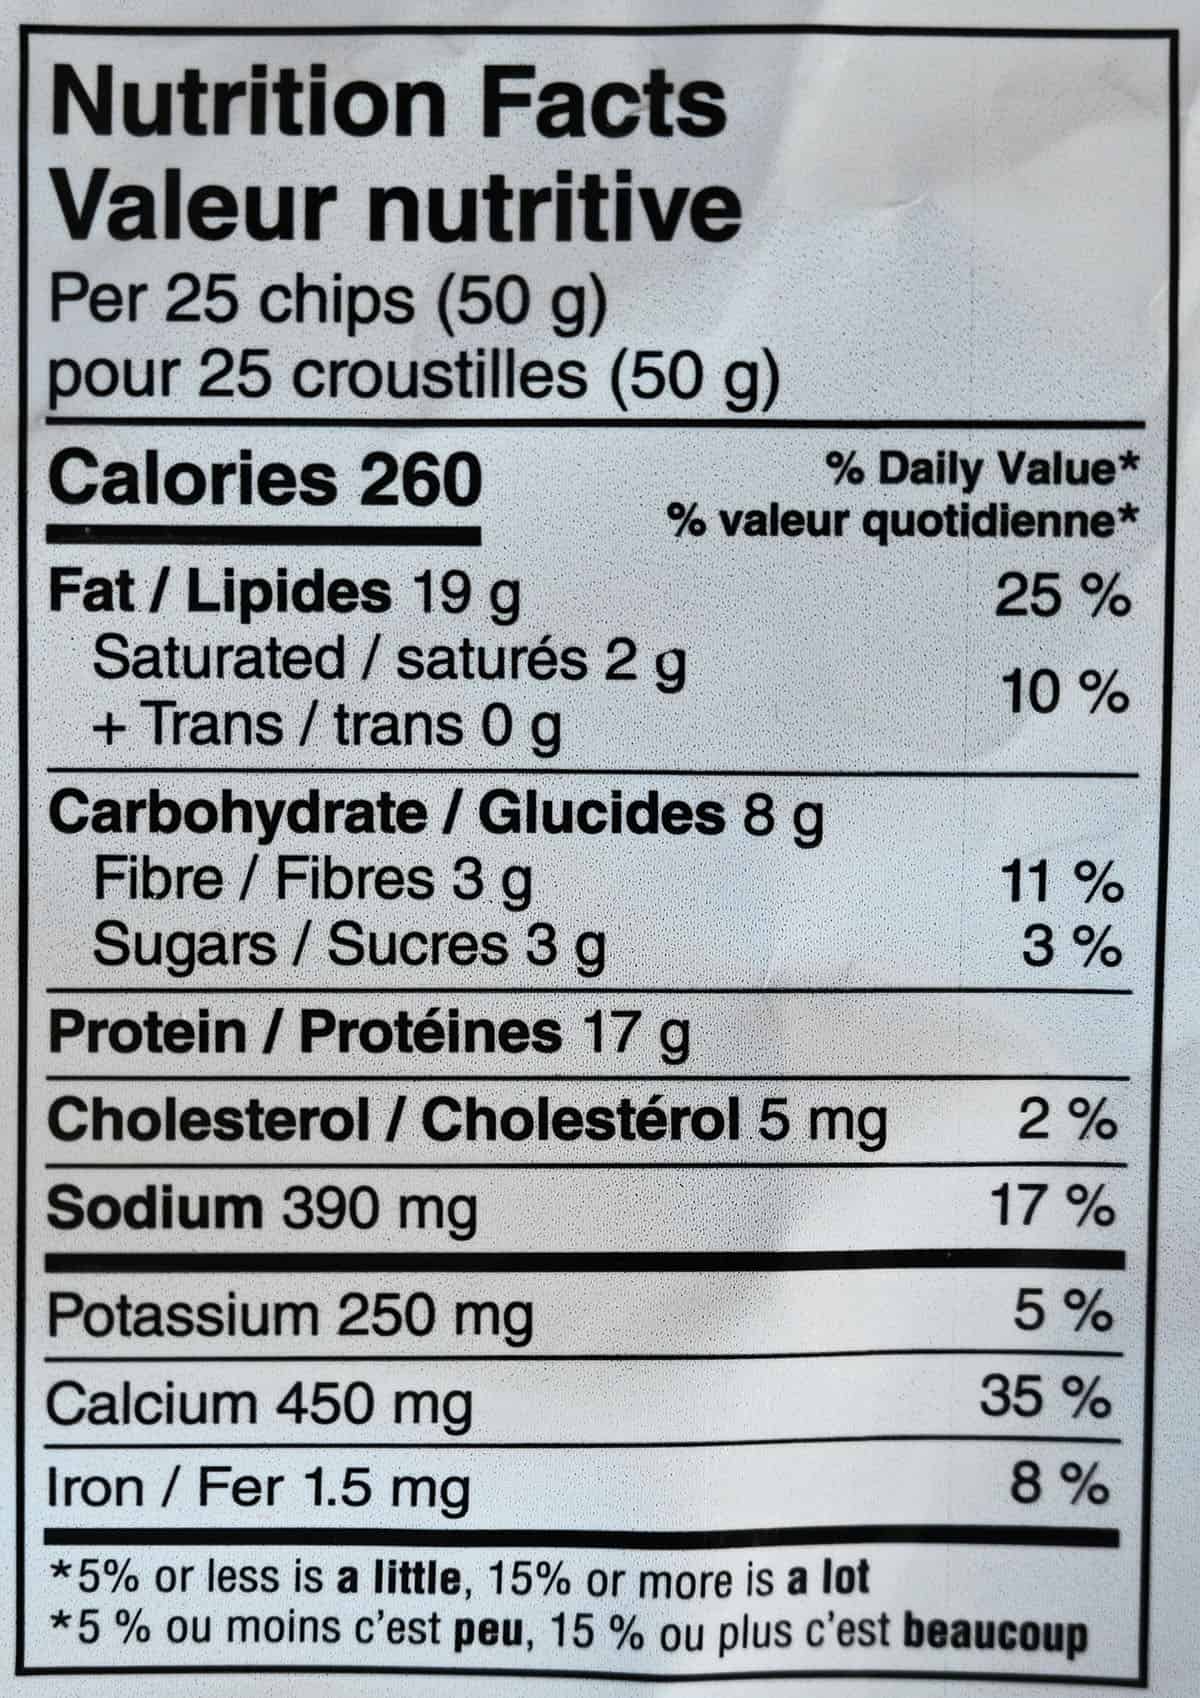 Image of the nutrition facts information from the back of the bag.